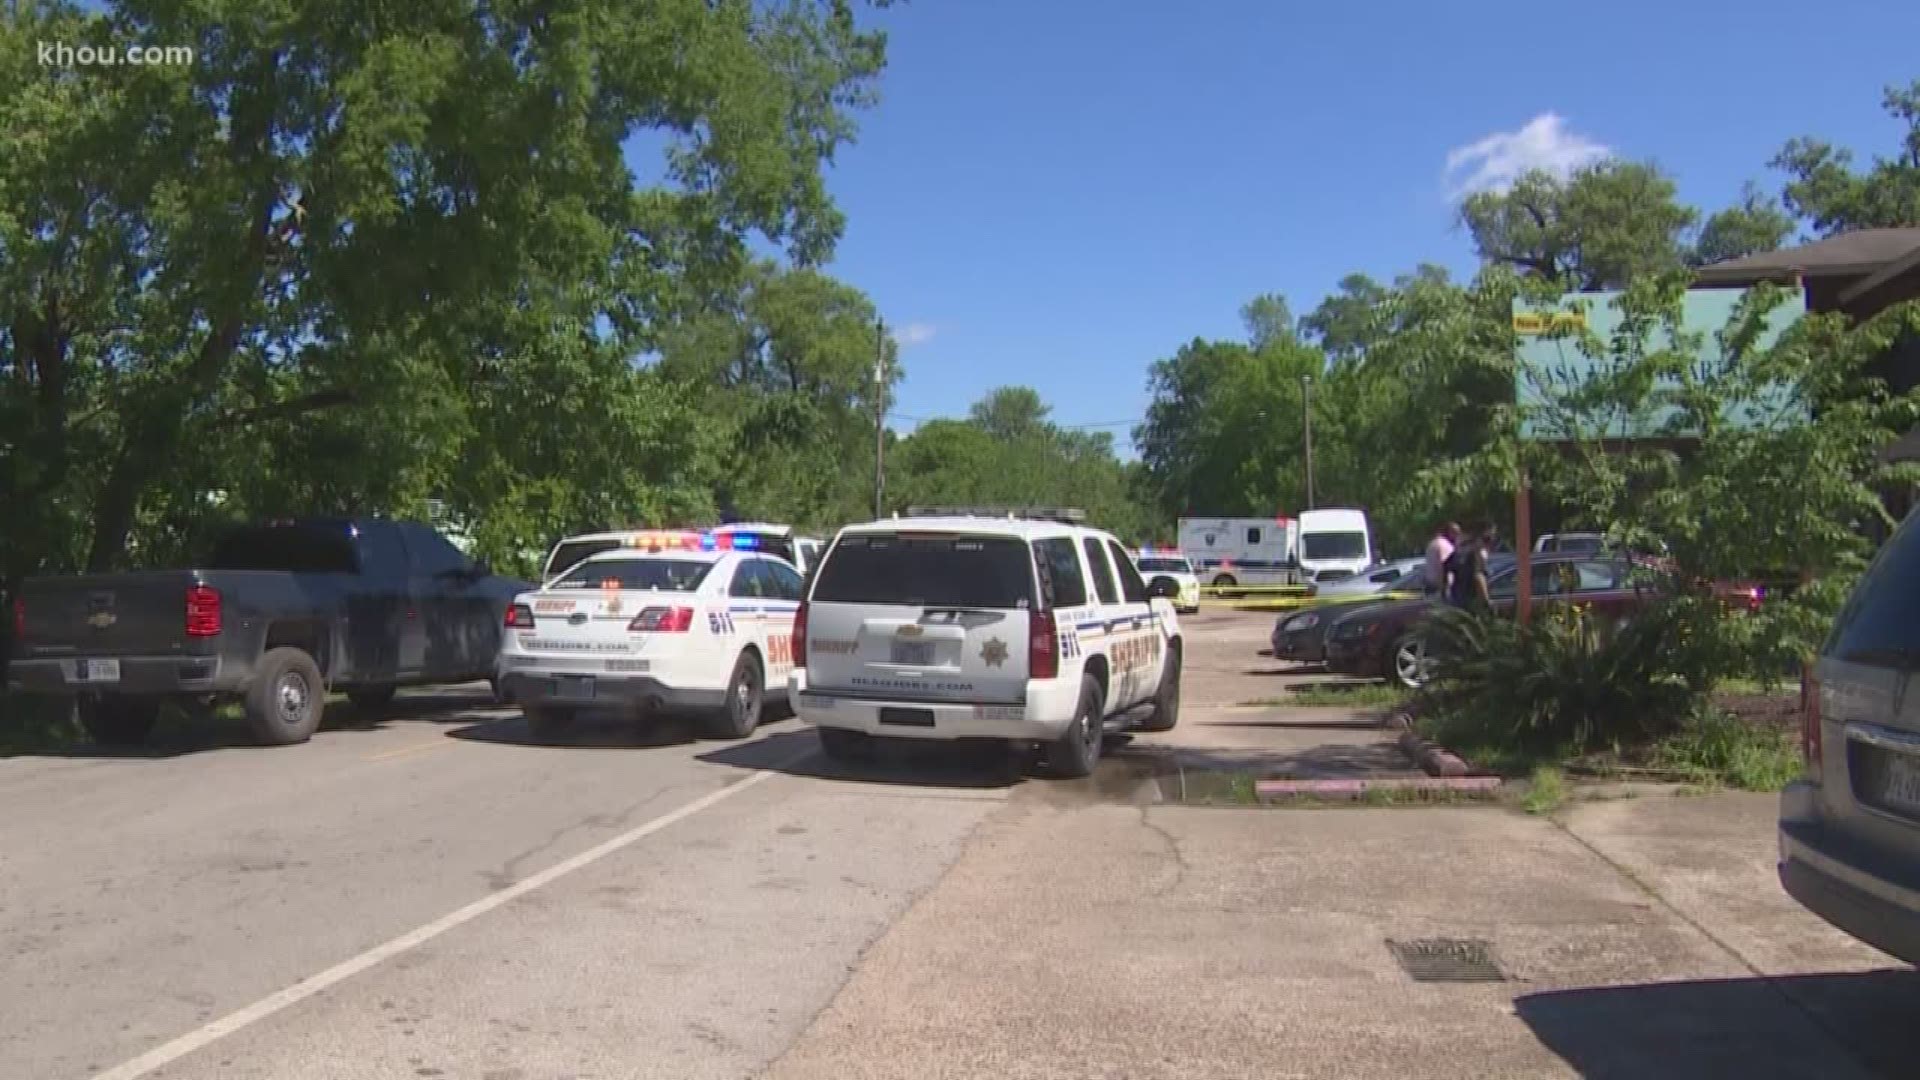 A man was shot and killed after getting into a fight with one of his neighbors in east Harris County on Thursday, deputies said.